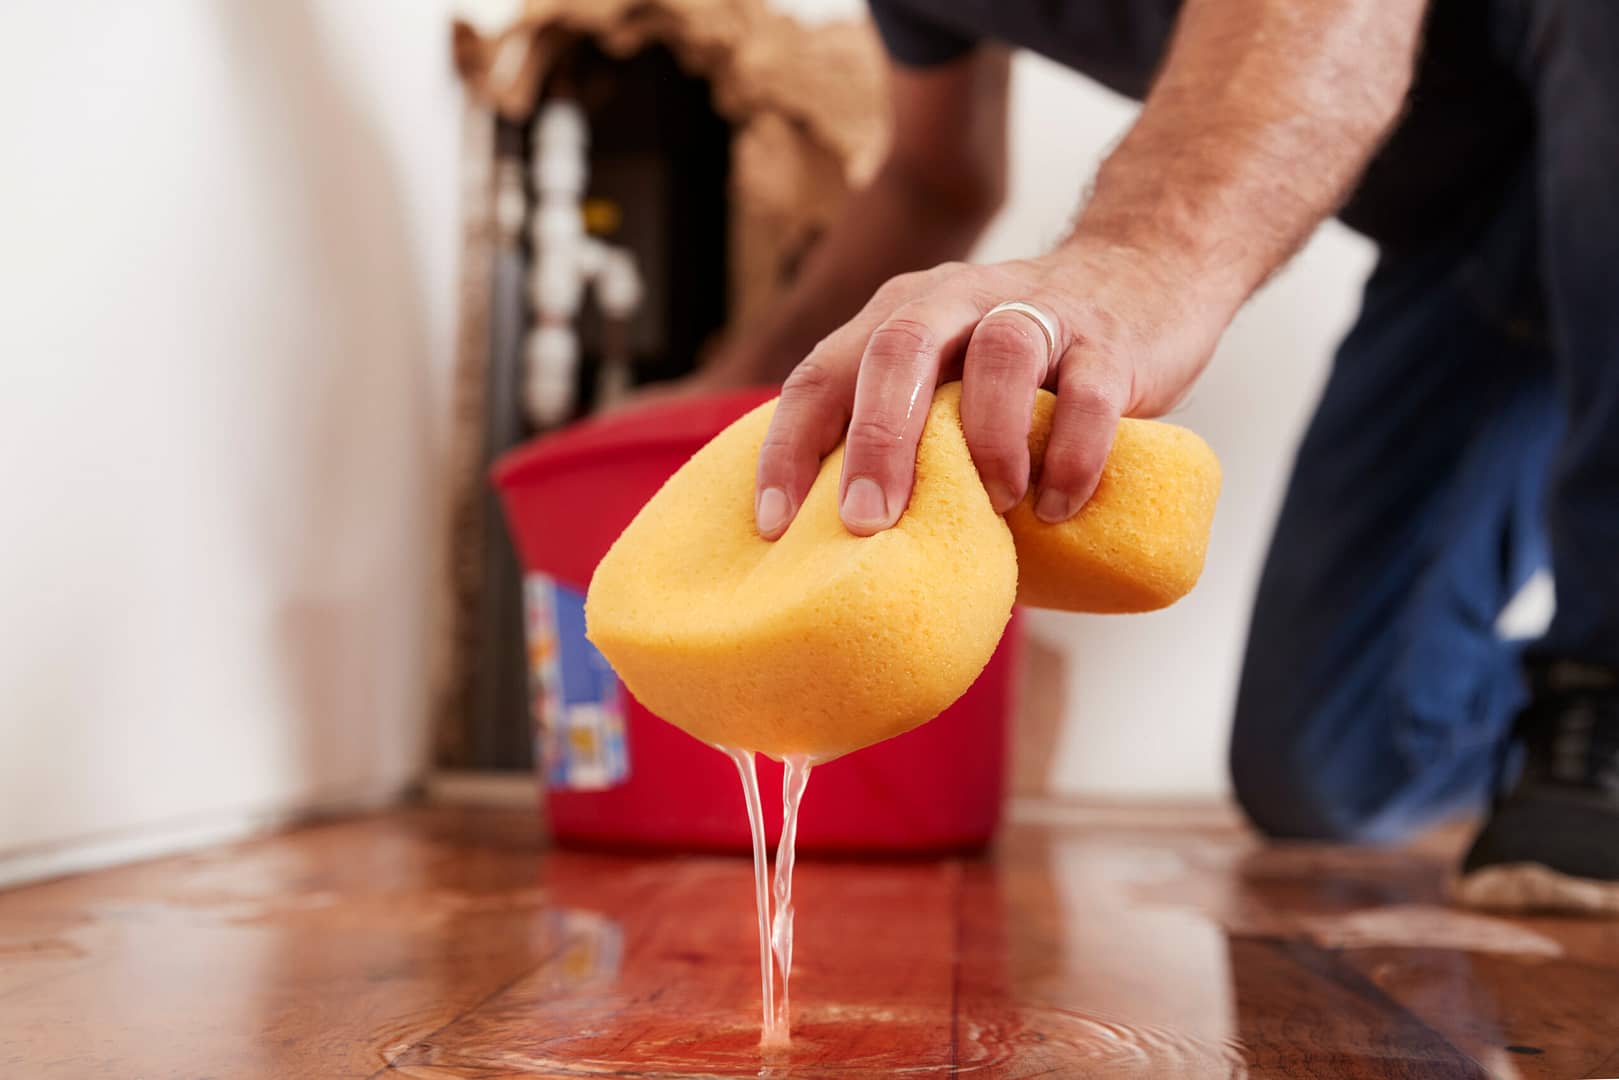 A man diligently cleaning up water from the floor with a sponge, ensuring a dry and safe environment.